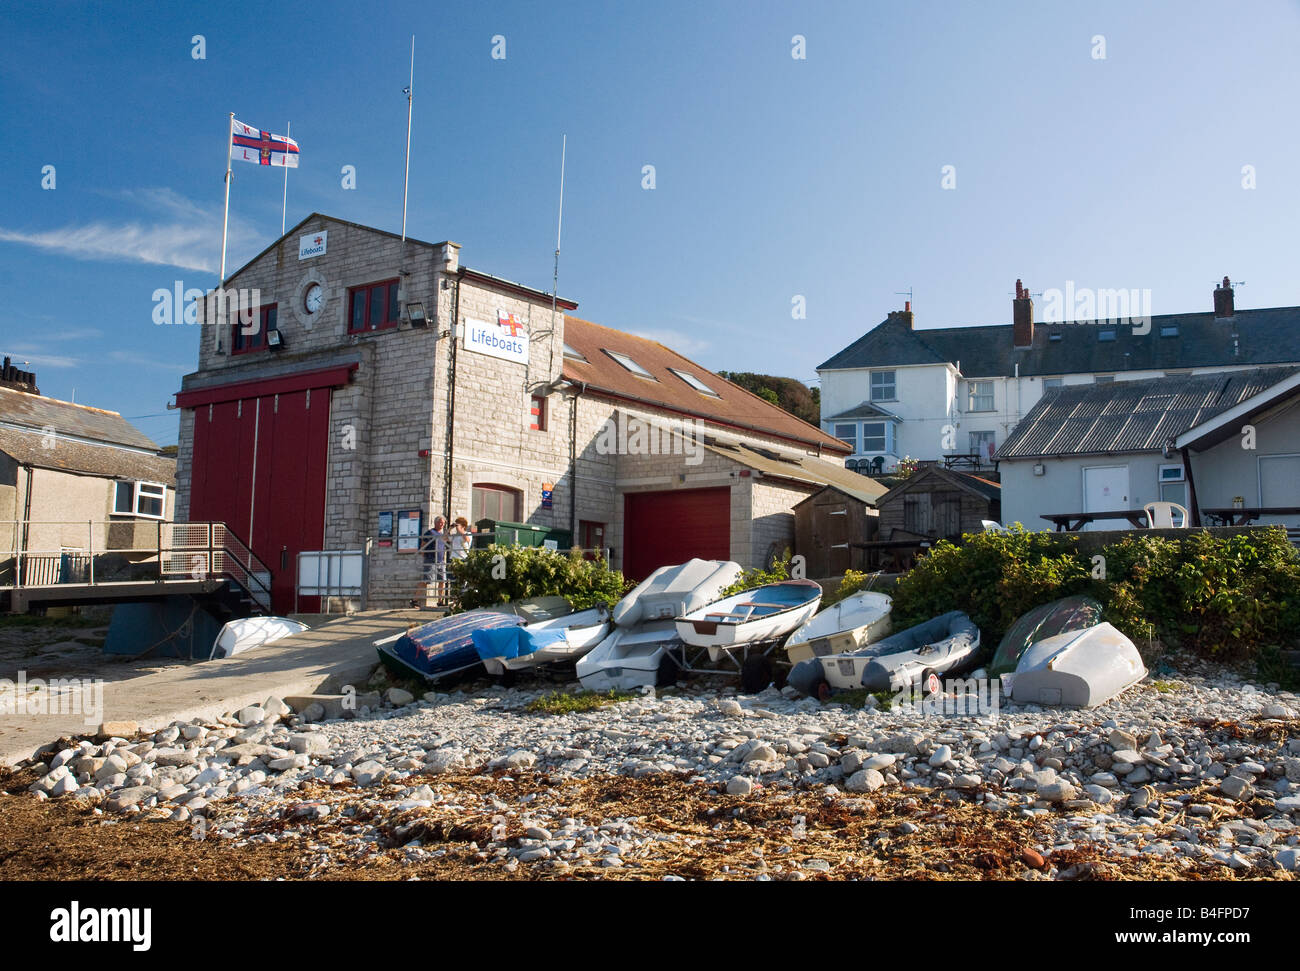 RNLI Life Boat House in Swanage Bay, Isle of Purbeck, Dorset Inghilterra Foto Stock